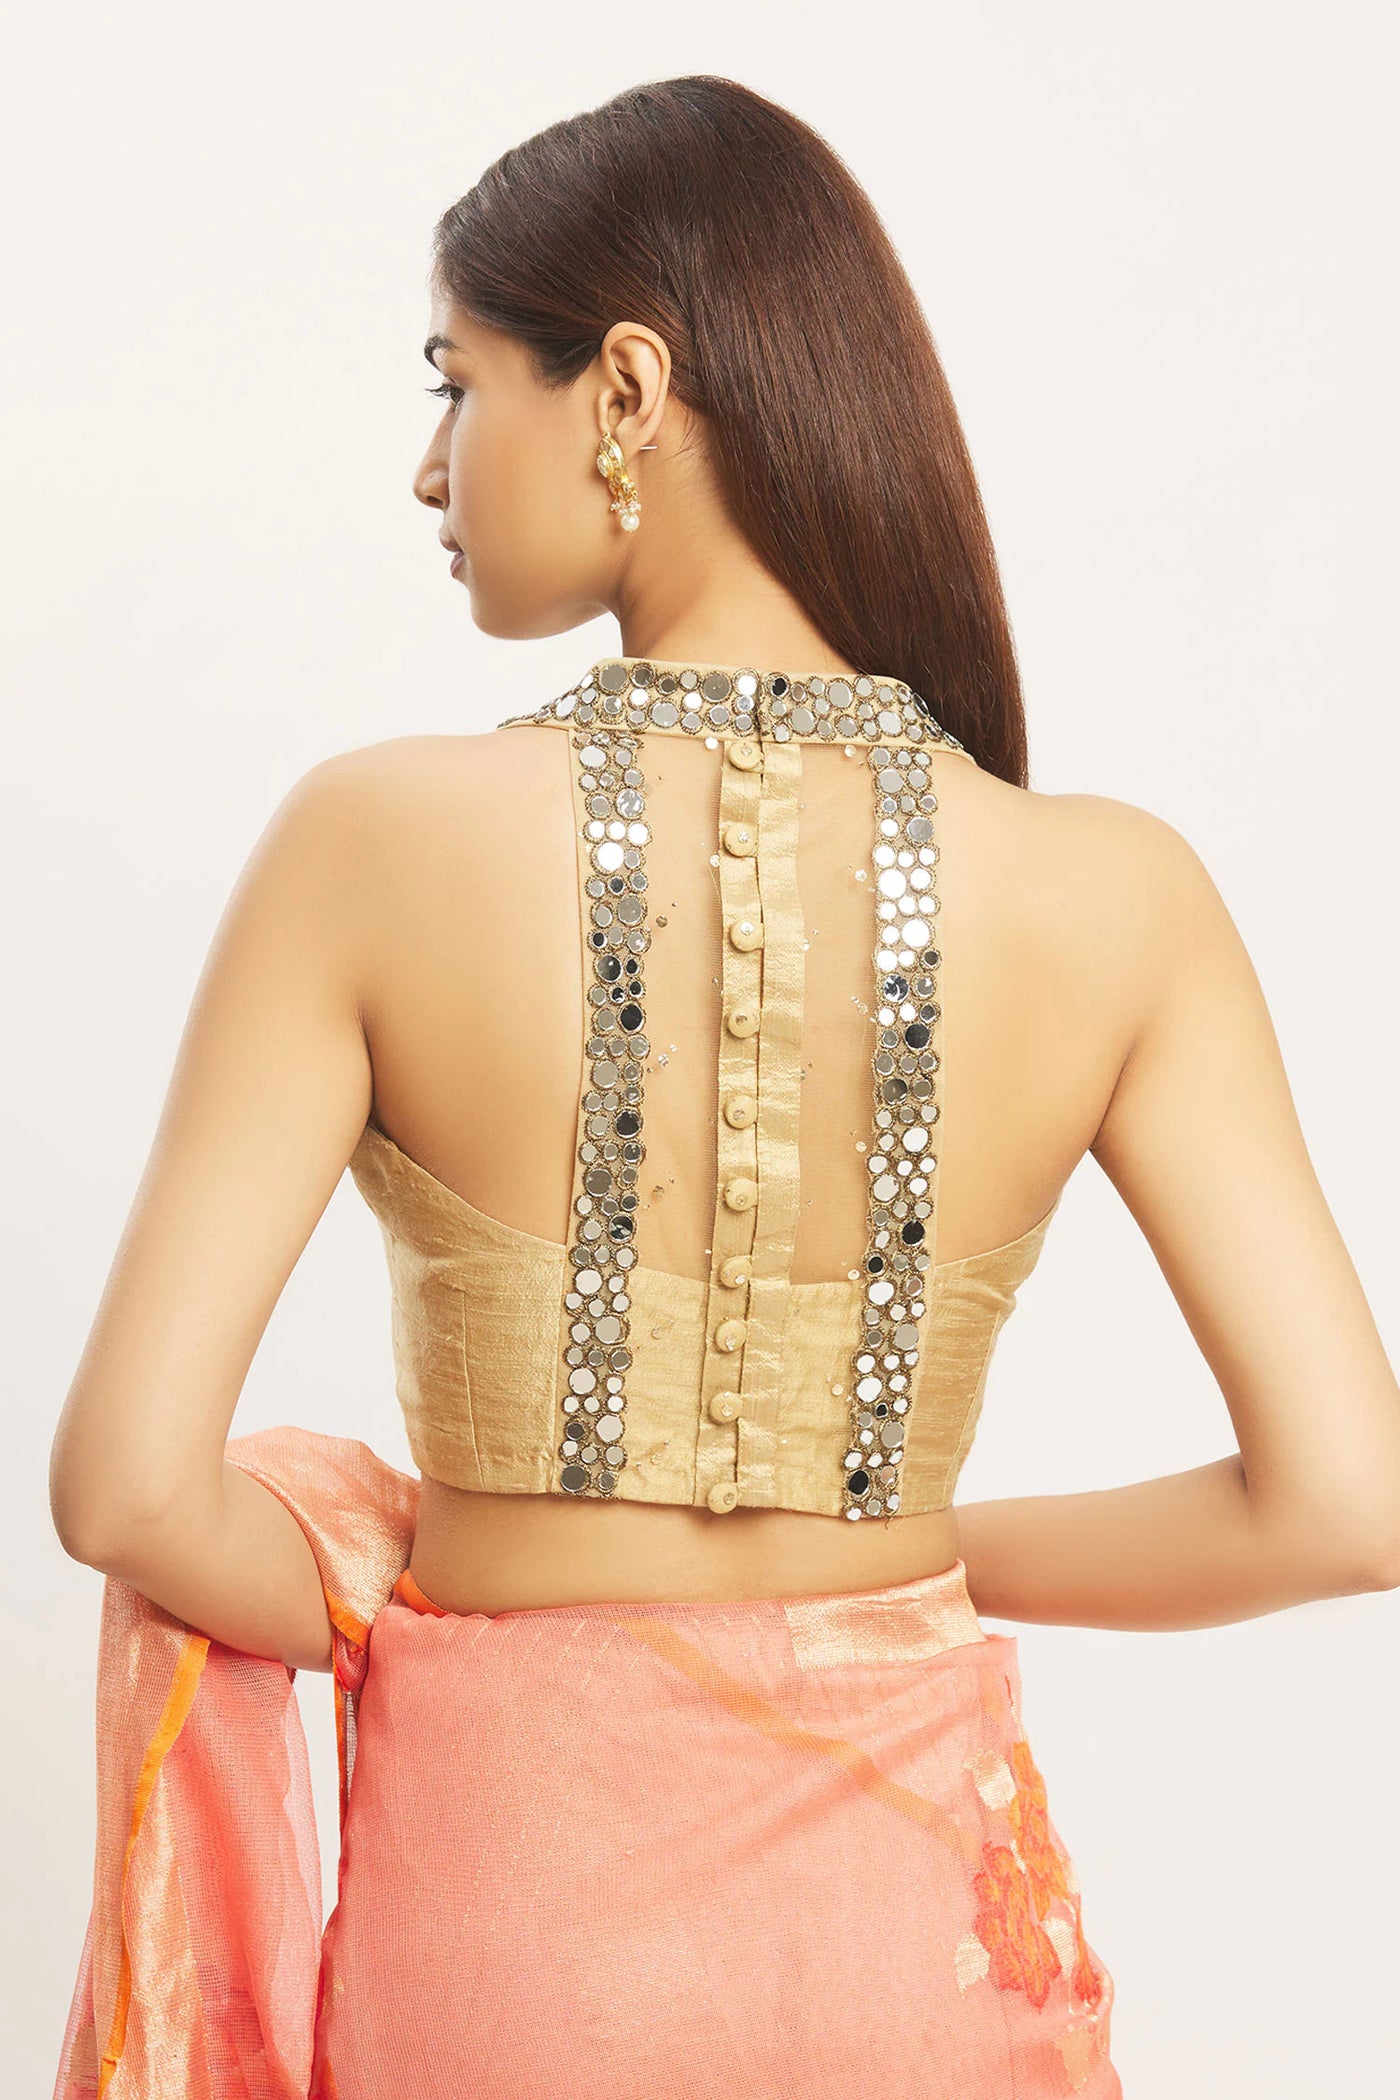 Halter-Neck Silk Saree Blouse - Indian Clothing in Denver, CO, Aurora, CO, Boulder, CO, Fort Collins, CO, Colorado Springs, CO, Parker, CO, Highlands Ranch, CO, Cherry Creek, CO, Centennial, CO, and Longmont, CO. Nationwide shipping USA - India Fashion X